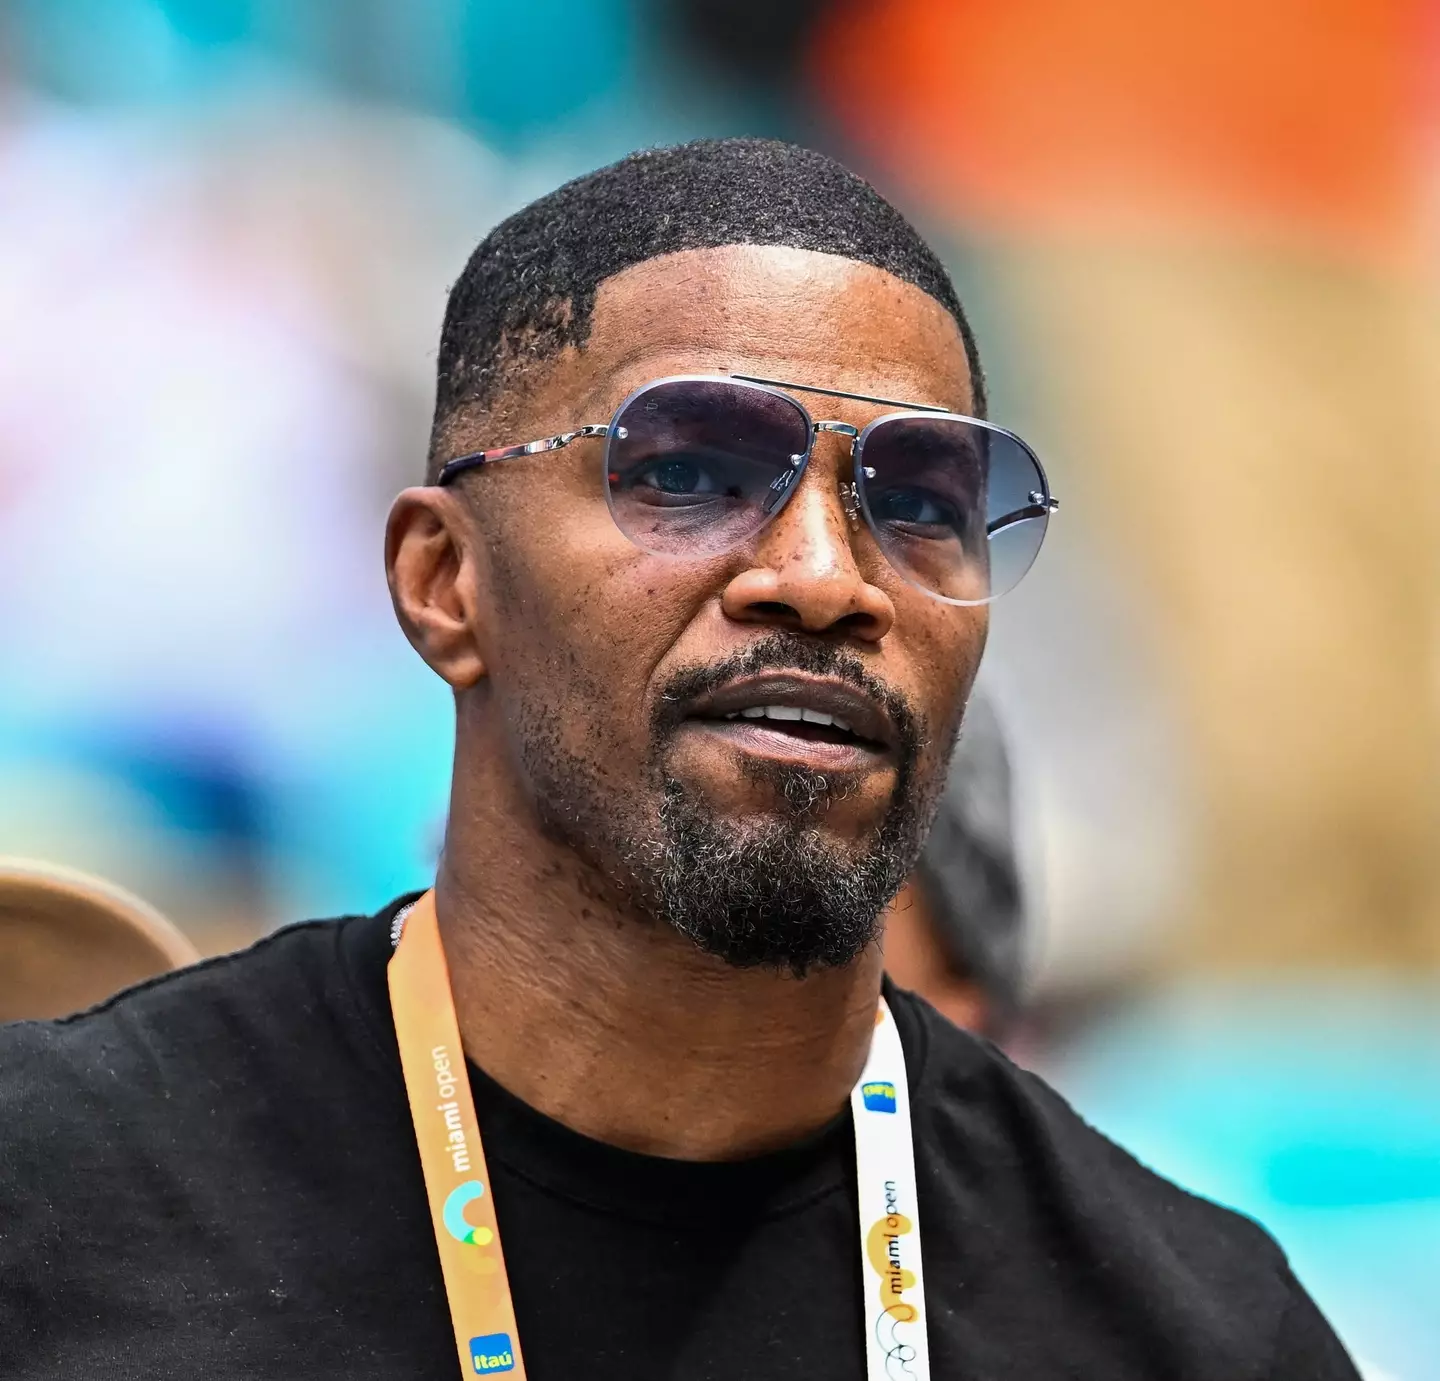 Jamie Foxx is being sued for alleged sexual assault, according to documents filed with the New York Supreme Court.